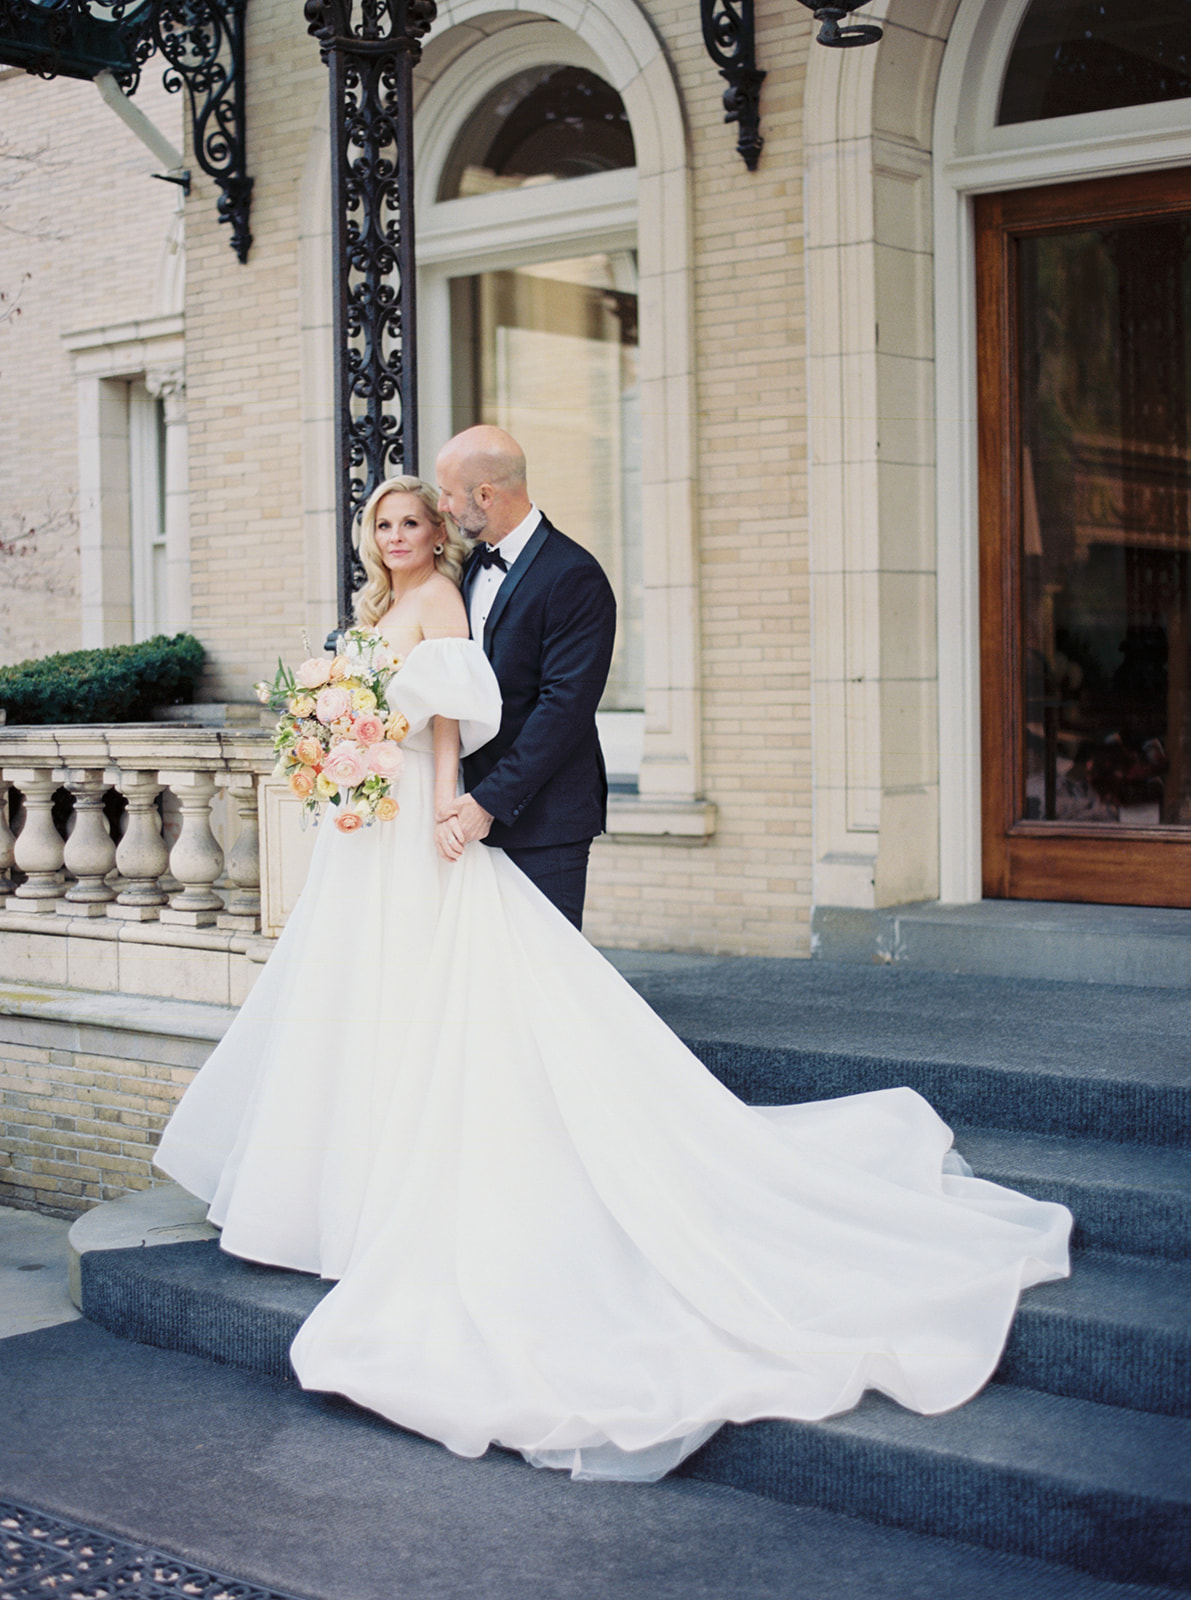 Classic and charming wedding couple at New England estate